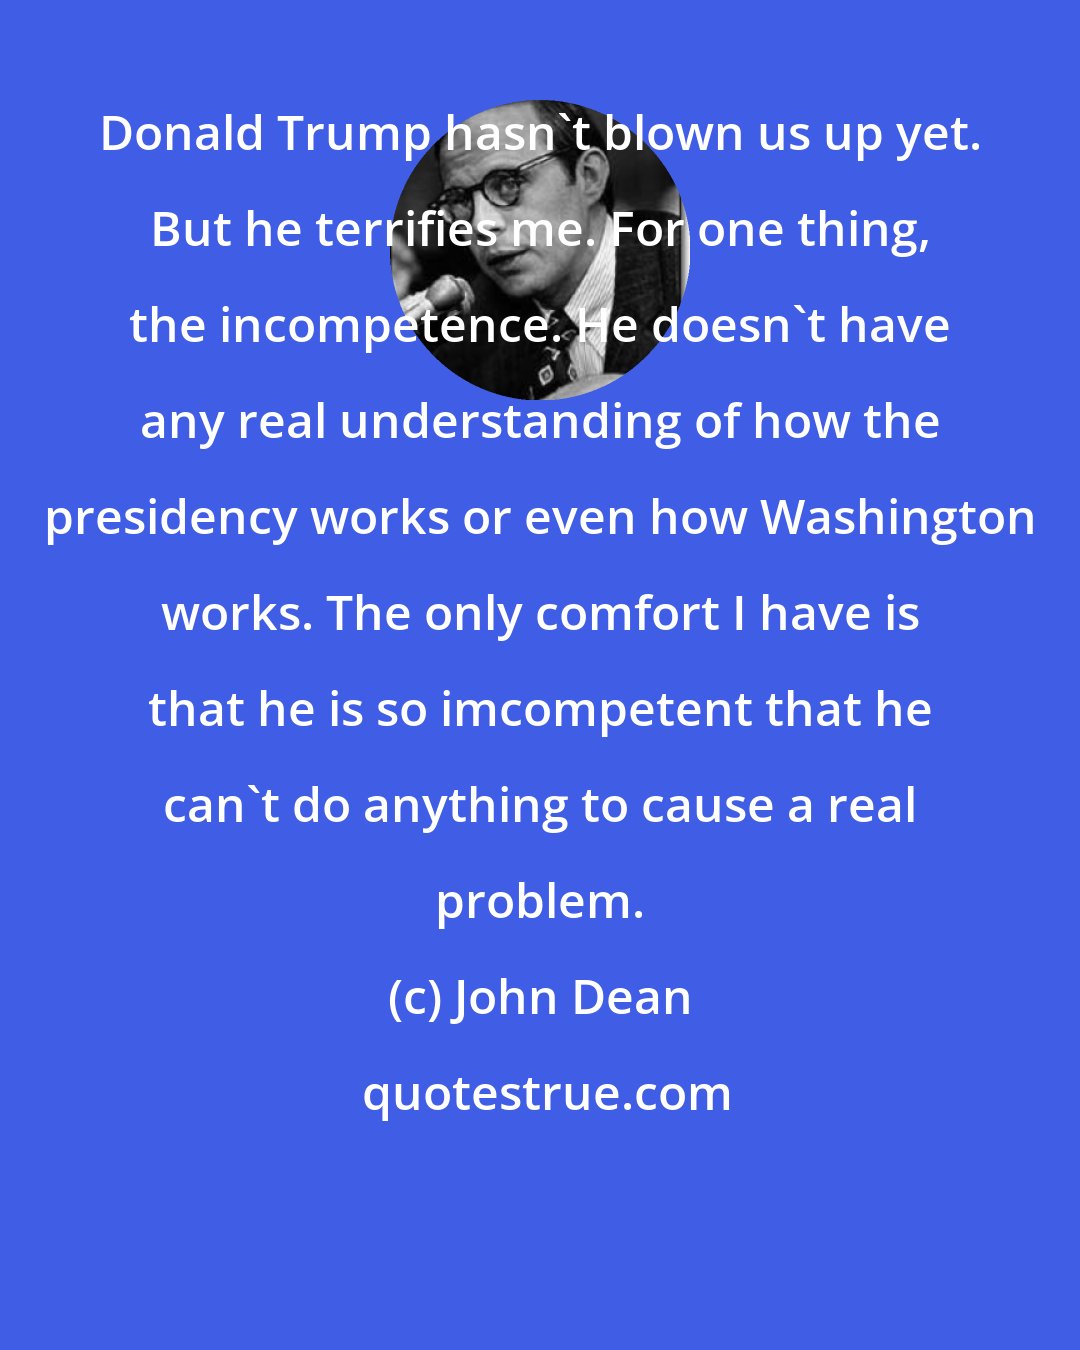 John Dean: Donald Trump hasn't blown us up yet. But he terrifies me. For one thing, the incompetence. He doesn't have any real understanding of how the presidency works or even how Washington works. The only comfort I have is that he is so imcompetent that he can't do anything to cause a real problem.